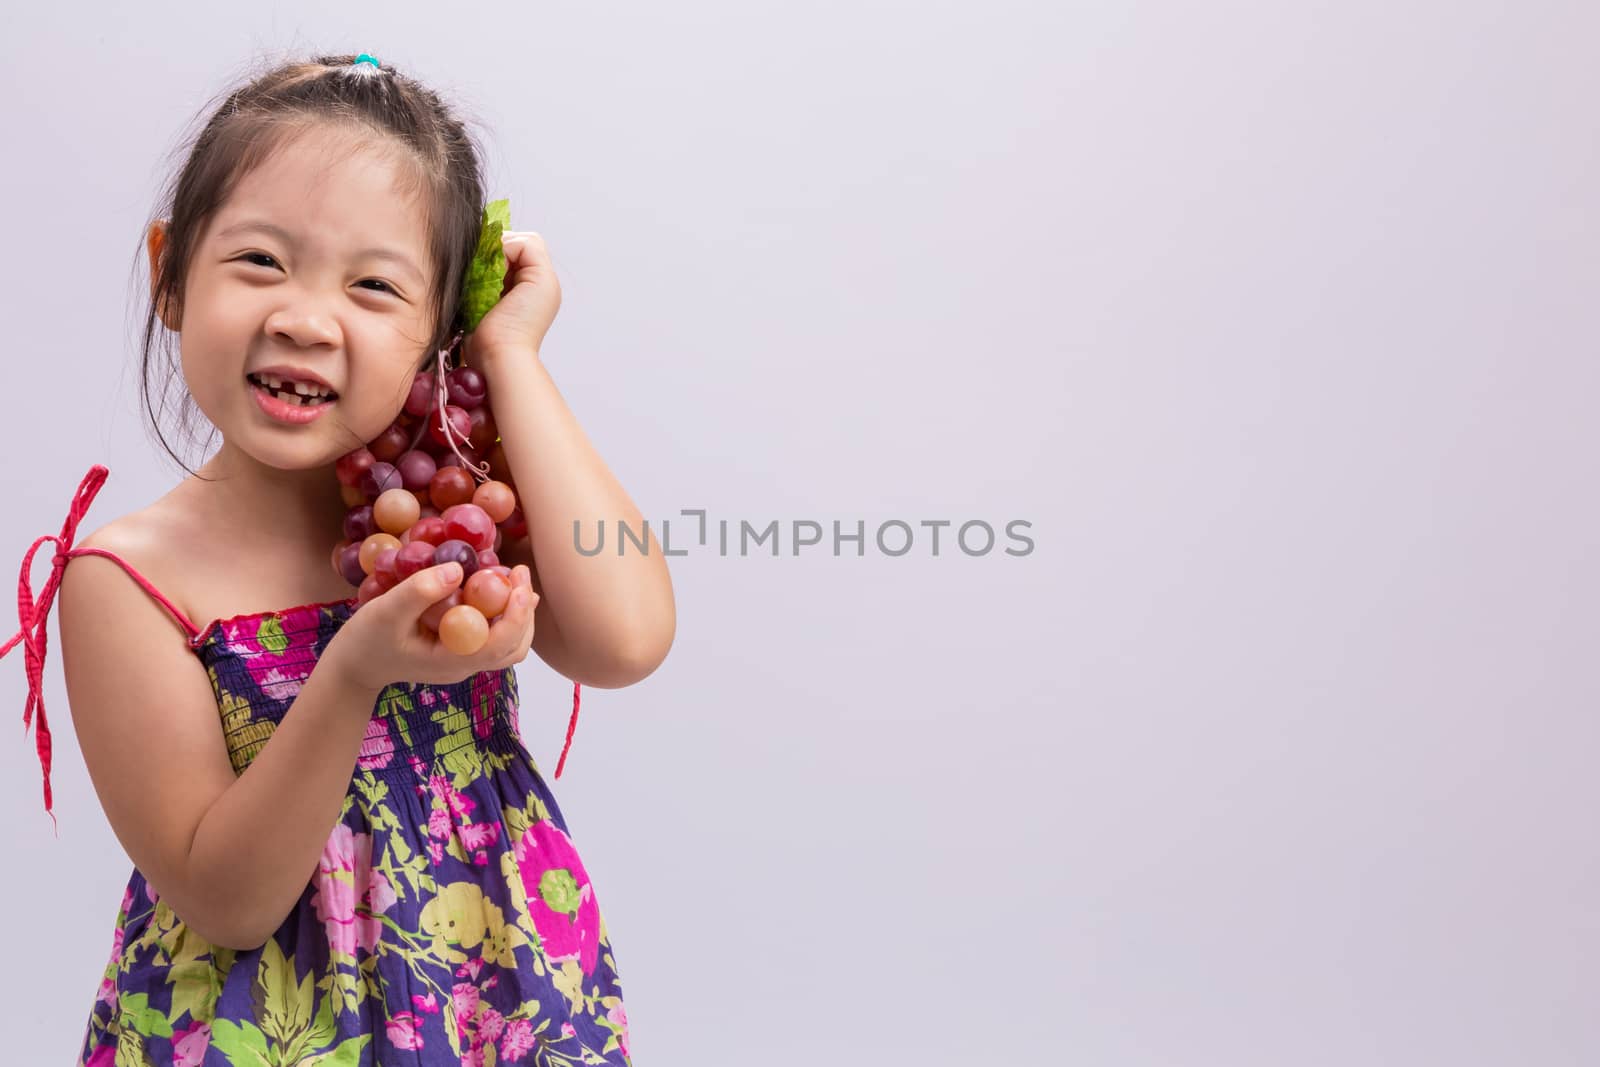 Child is holding grapes in her hand background.